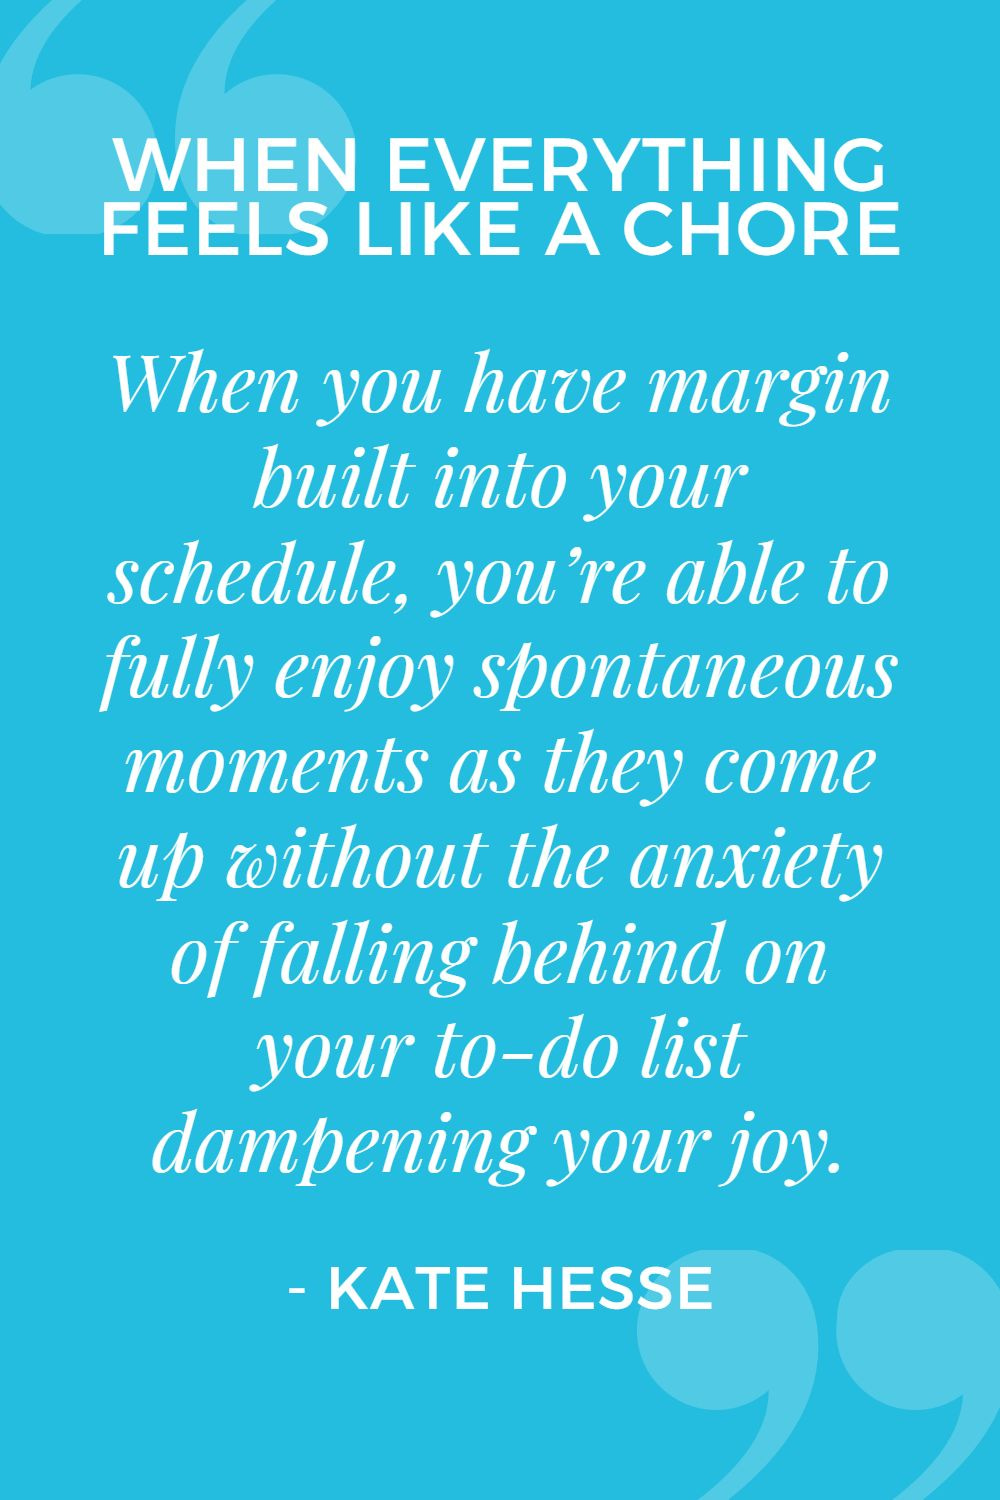 When you have margin built into your schedule, you're able to fully enjoy spontaneous moments as they come up without the anxiety of falling behind on your to-do list dampening your joy.